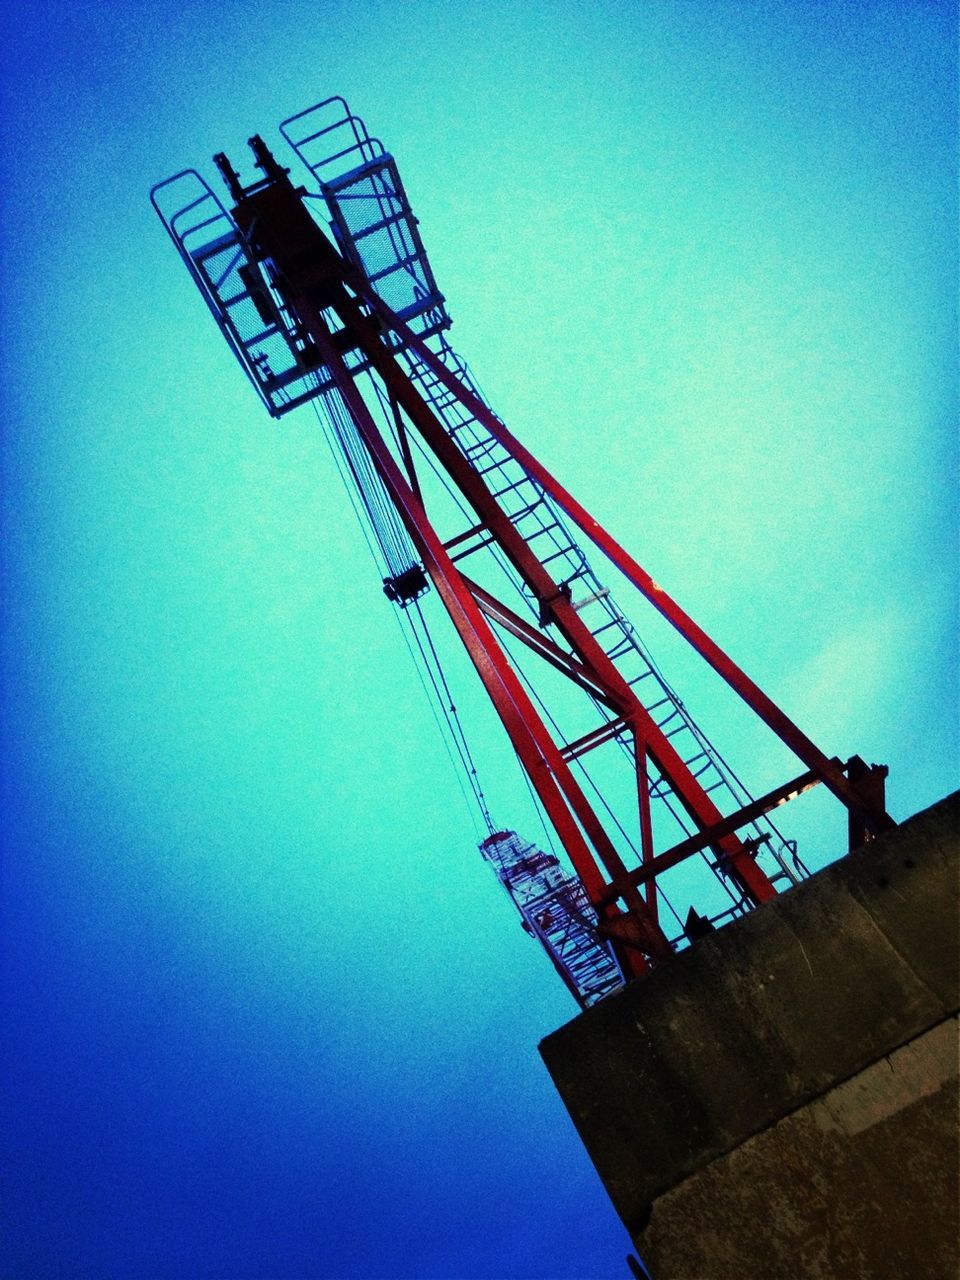 Low angle view of crane against blue sky at dusk